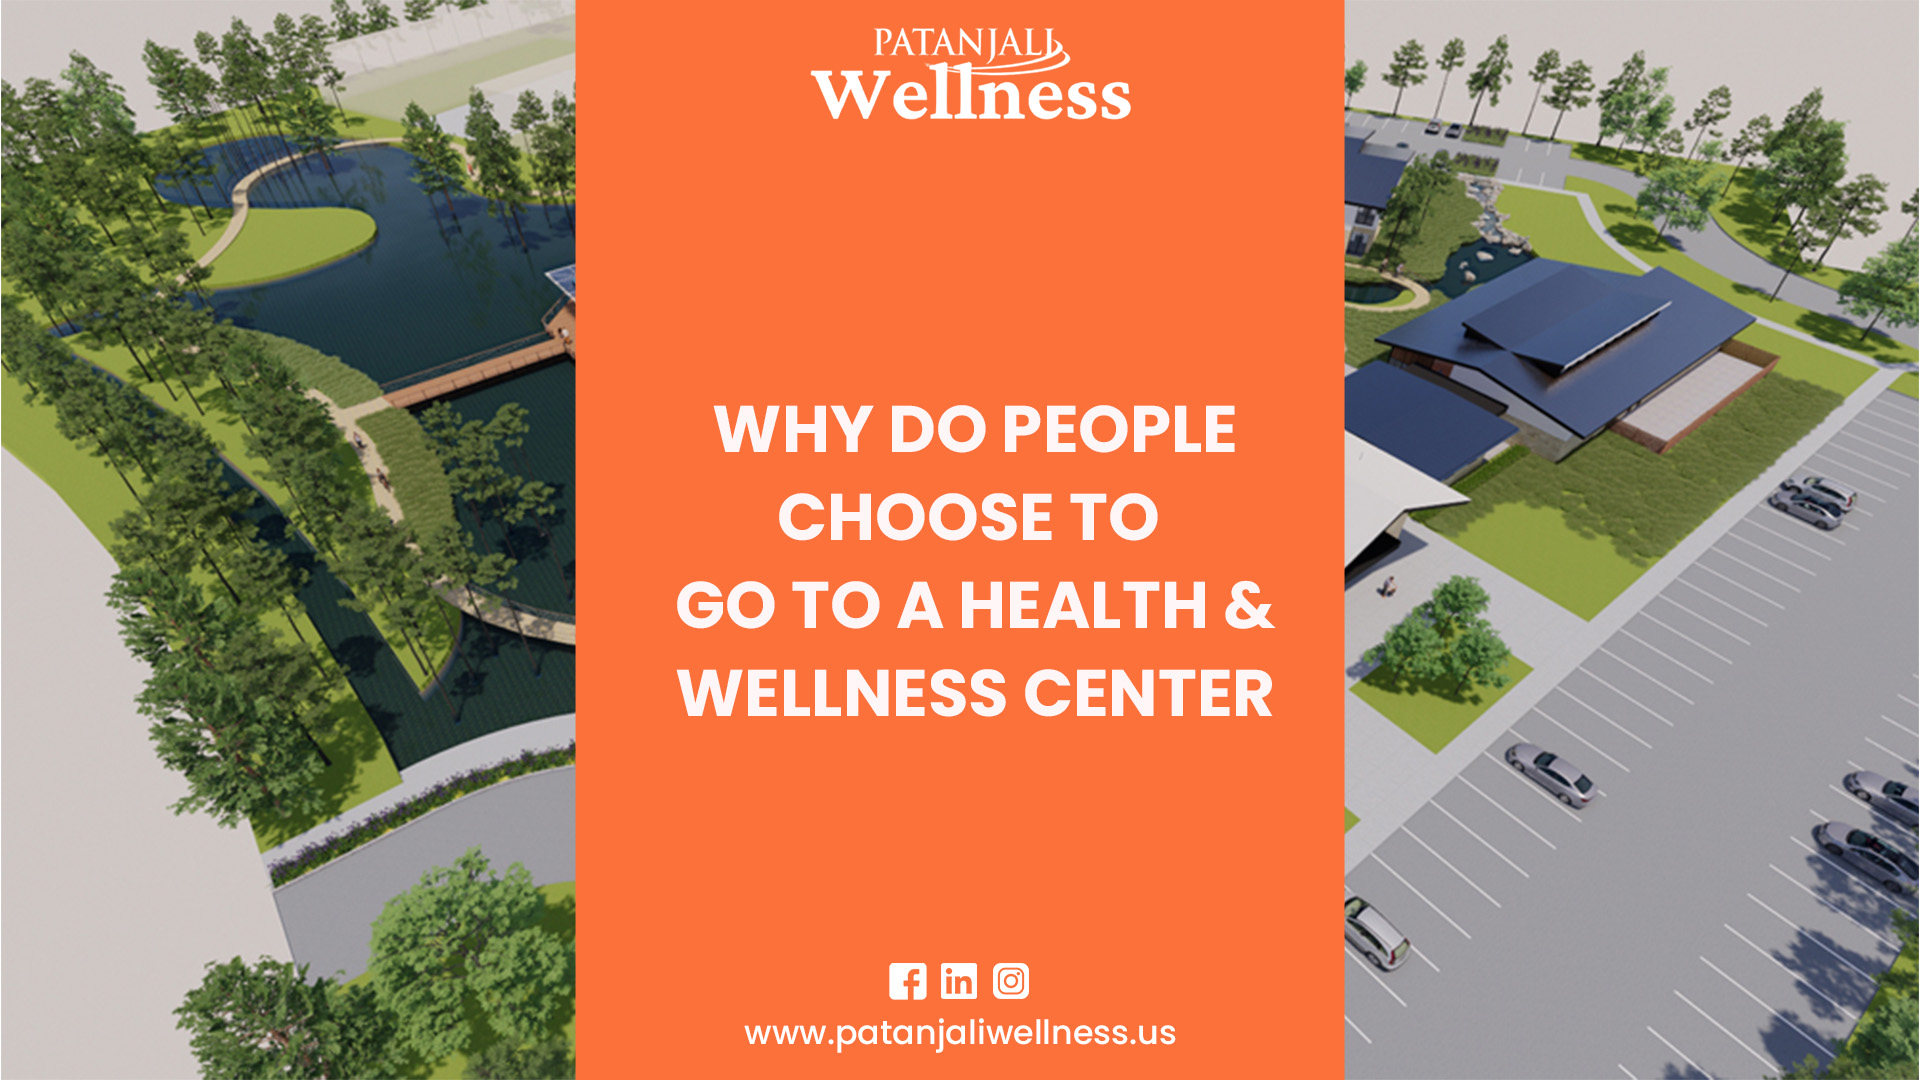 Why do people choose to go to a health & wellness center?